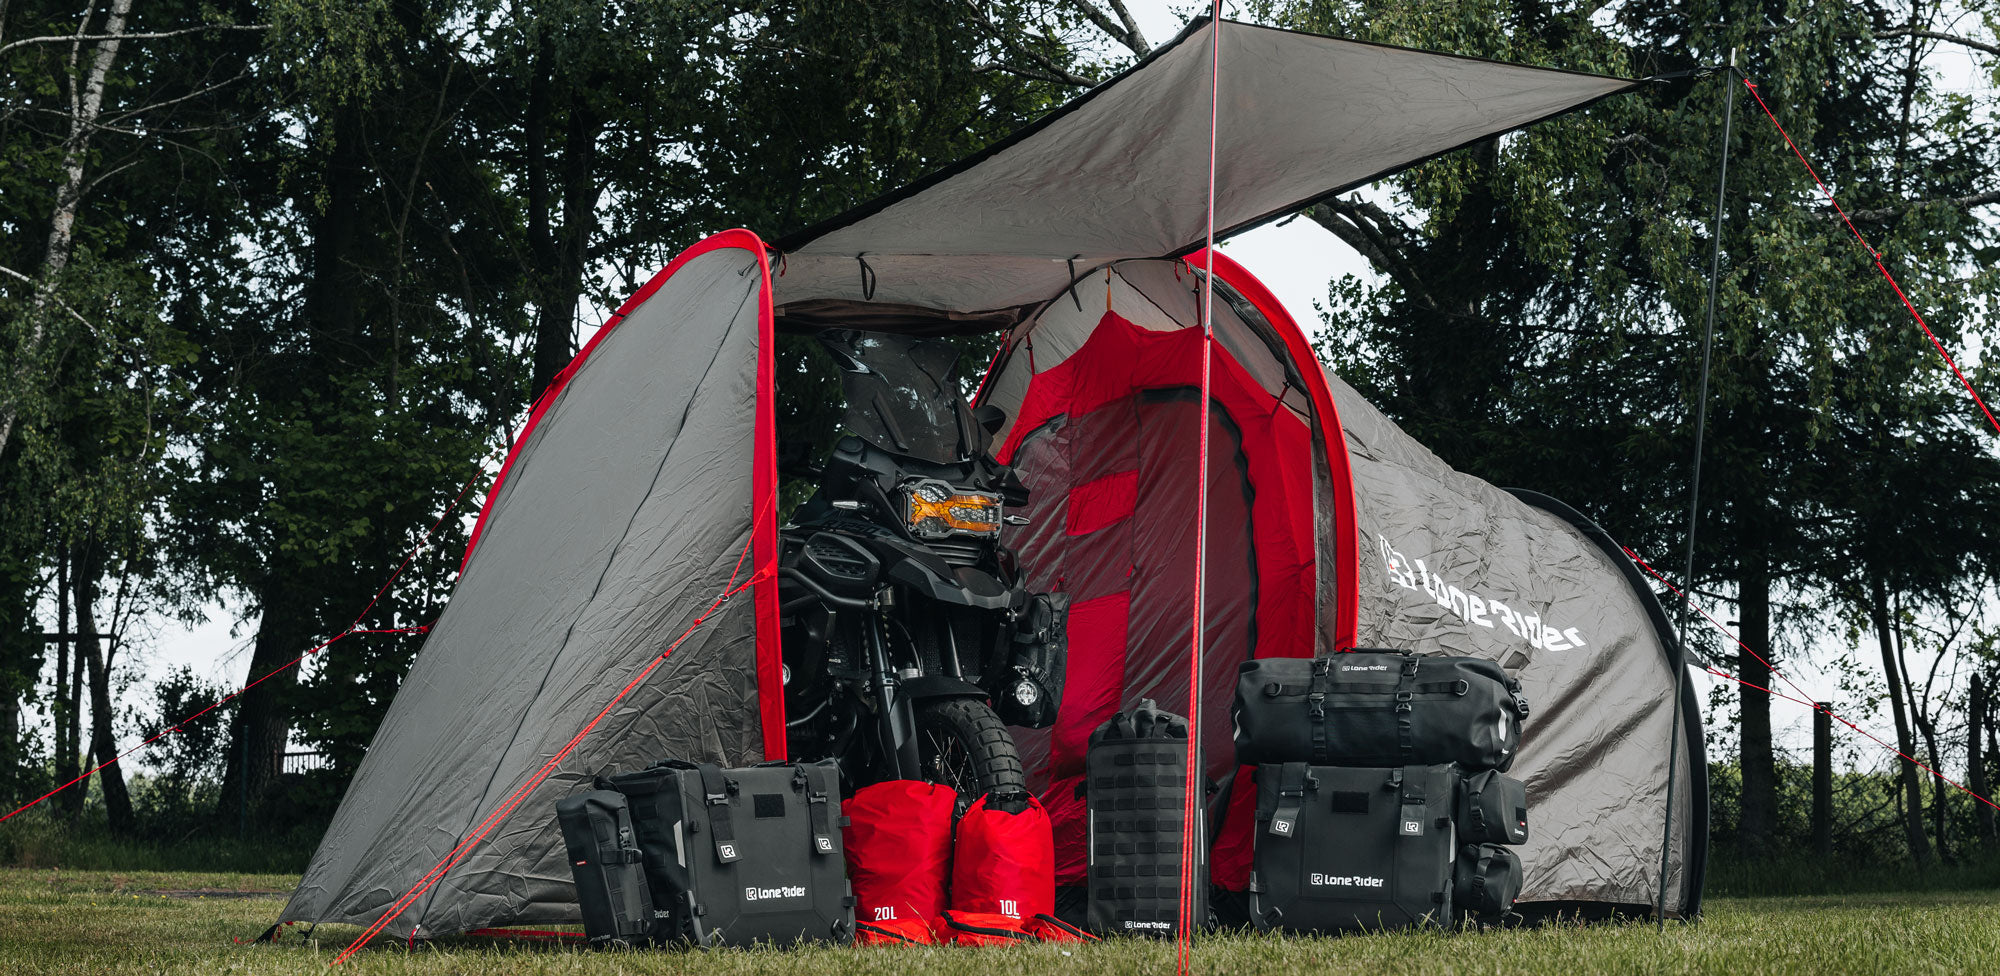 Motorcycle Camping Tent: Shop All Durable Lone Rider Tents